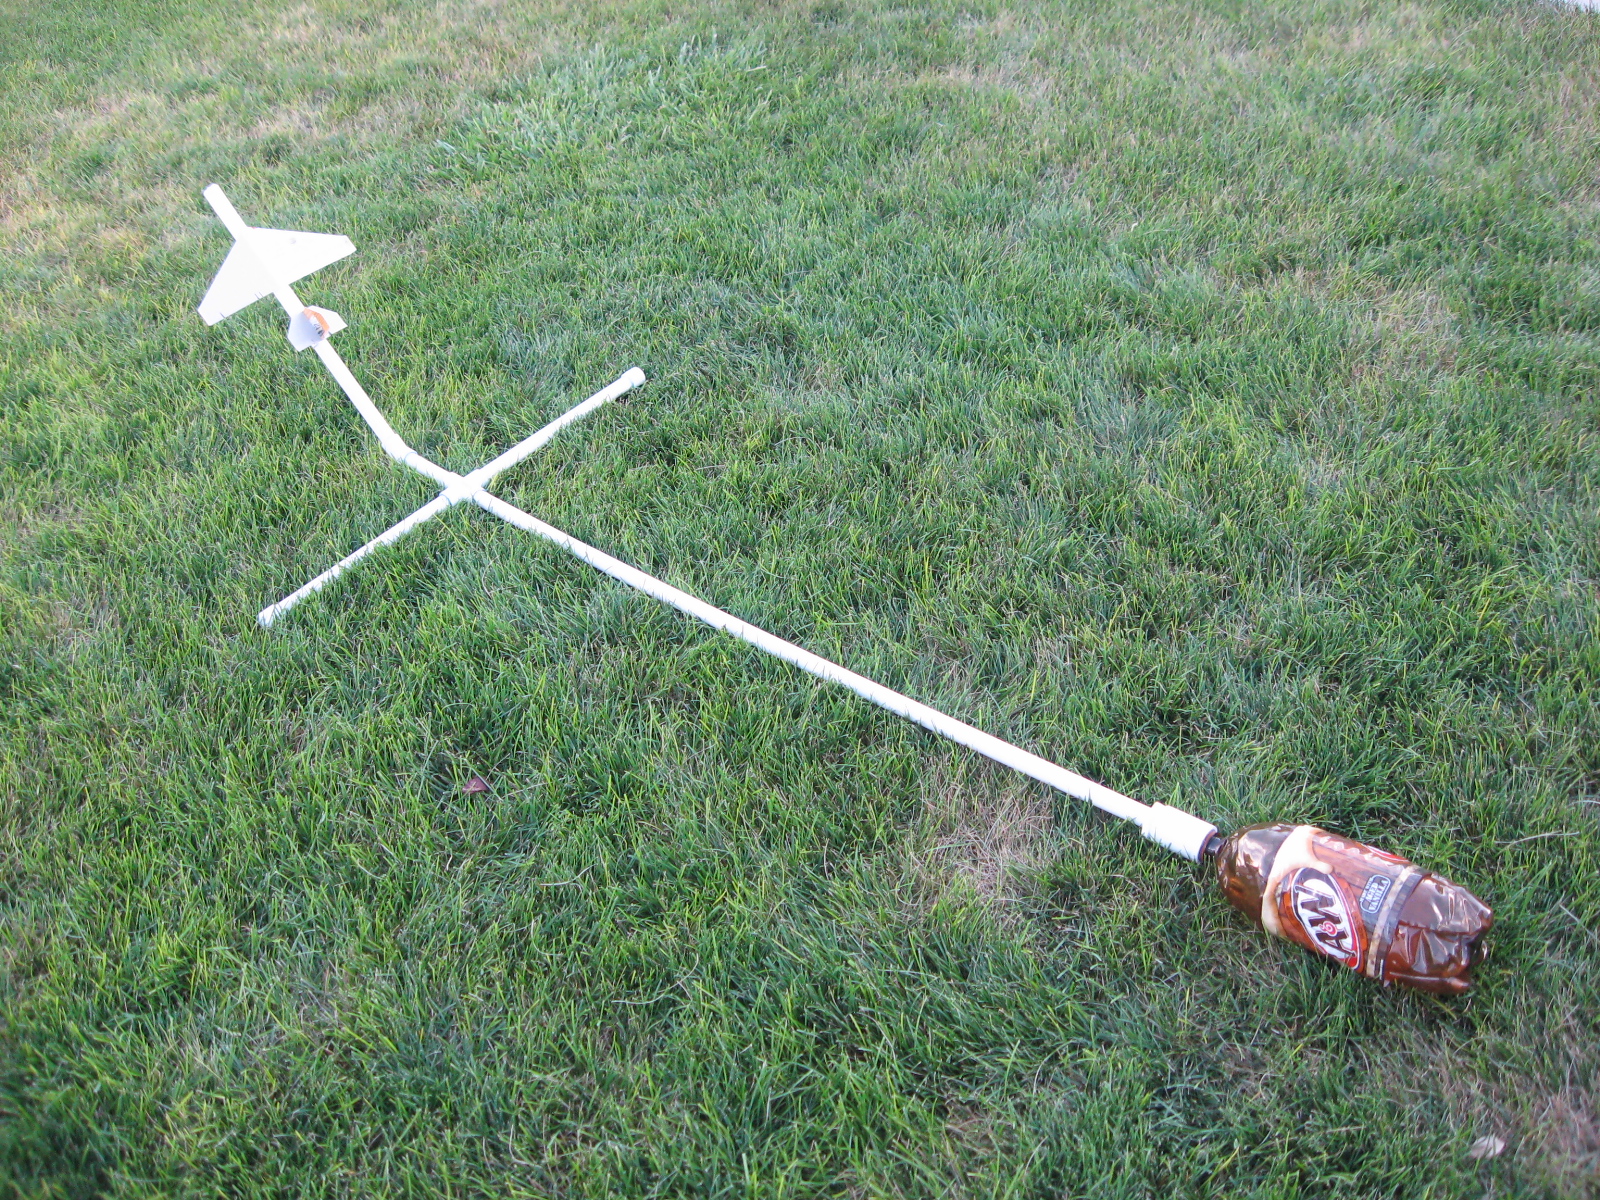 view of a stomp rocket assembled on the grass